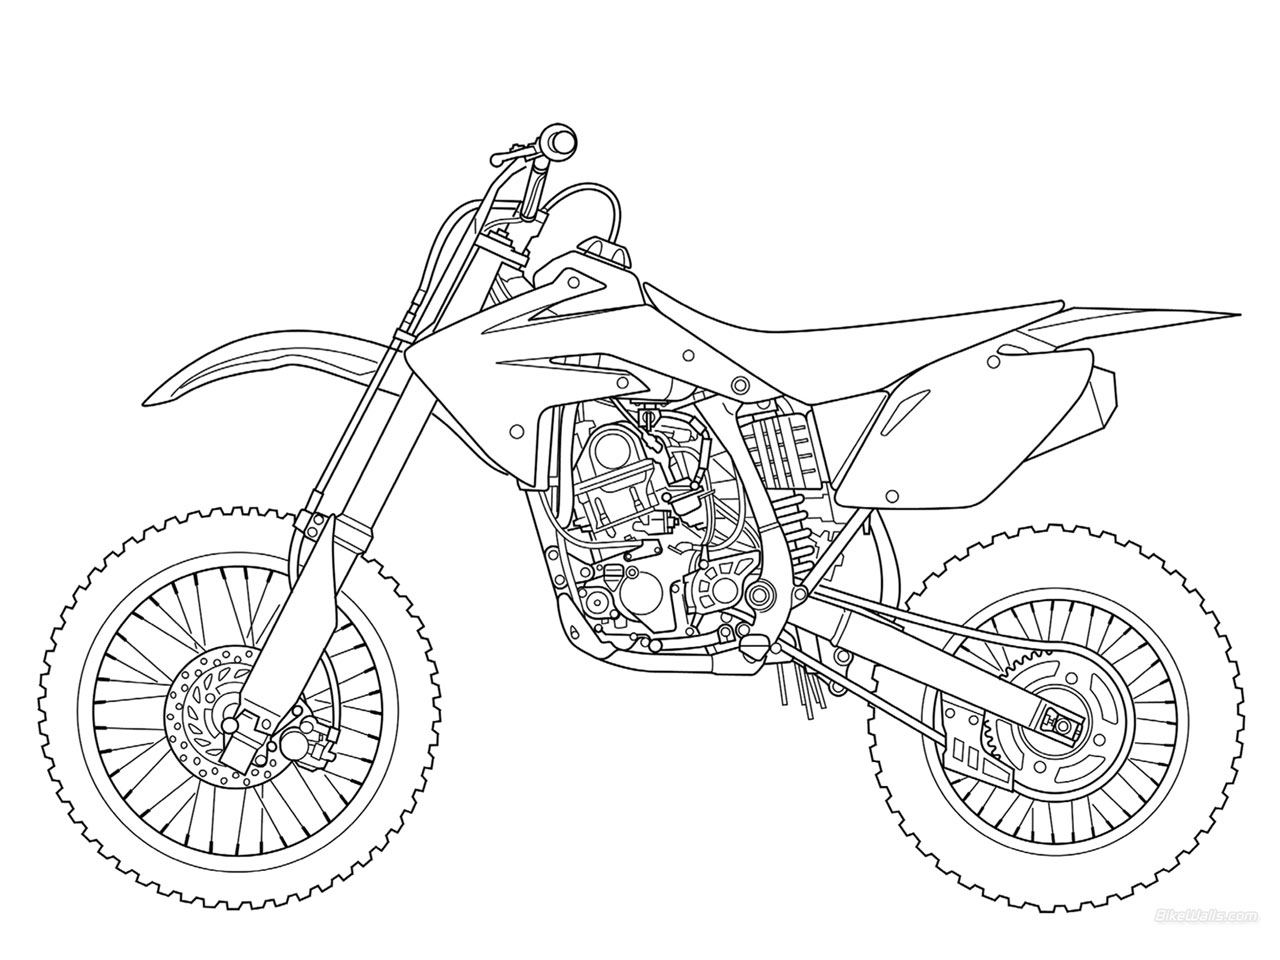 Sport Motorcycle Coloring Page - Free Printable Coloring Pages for ...